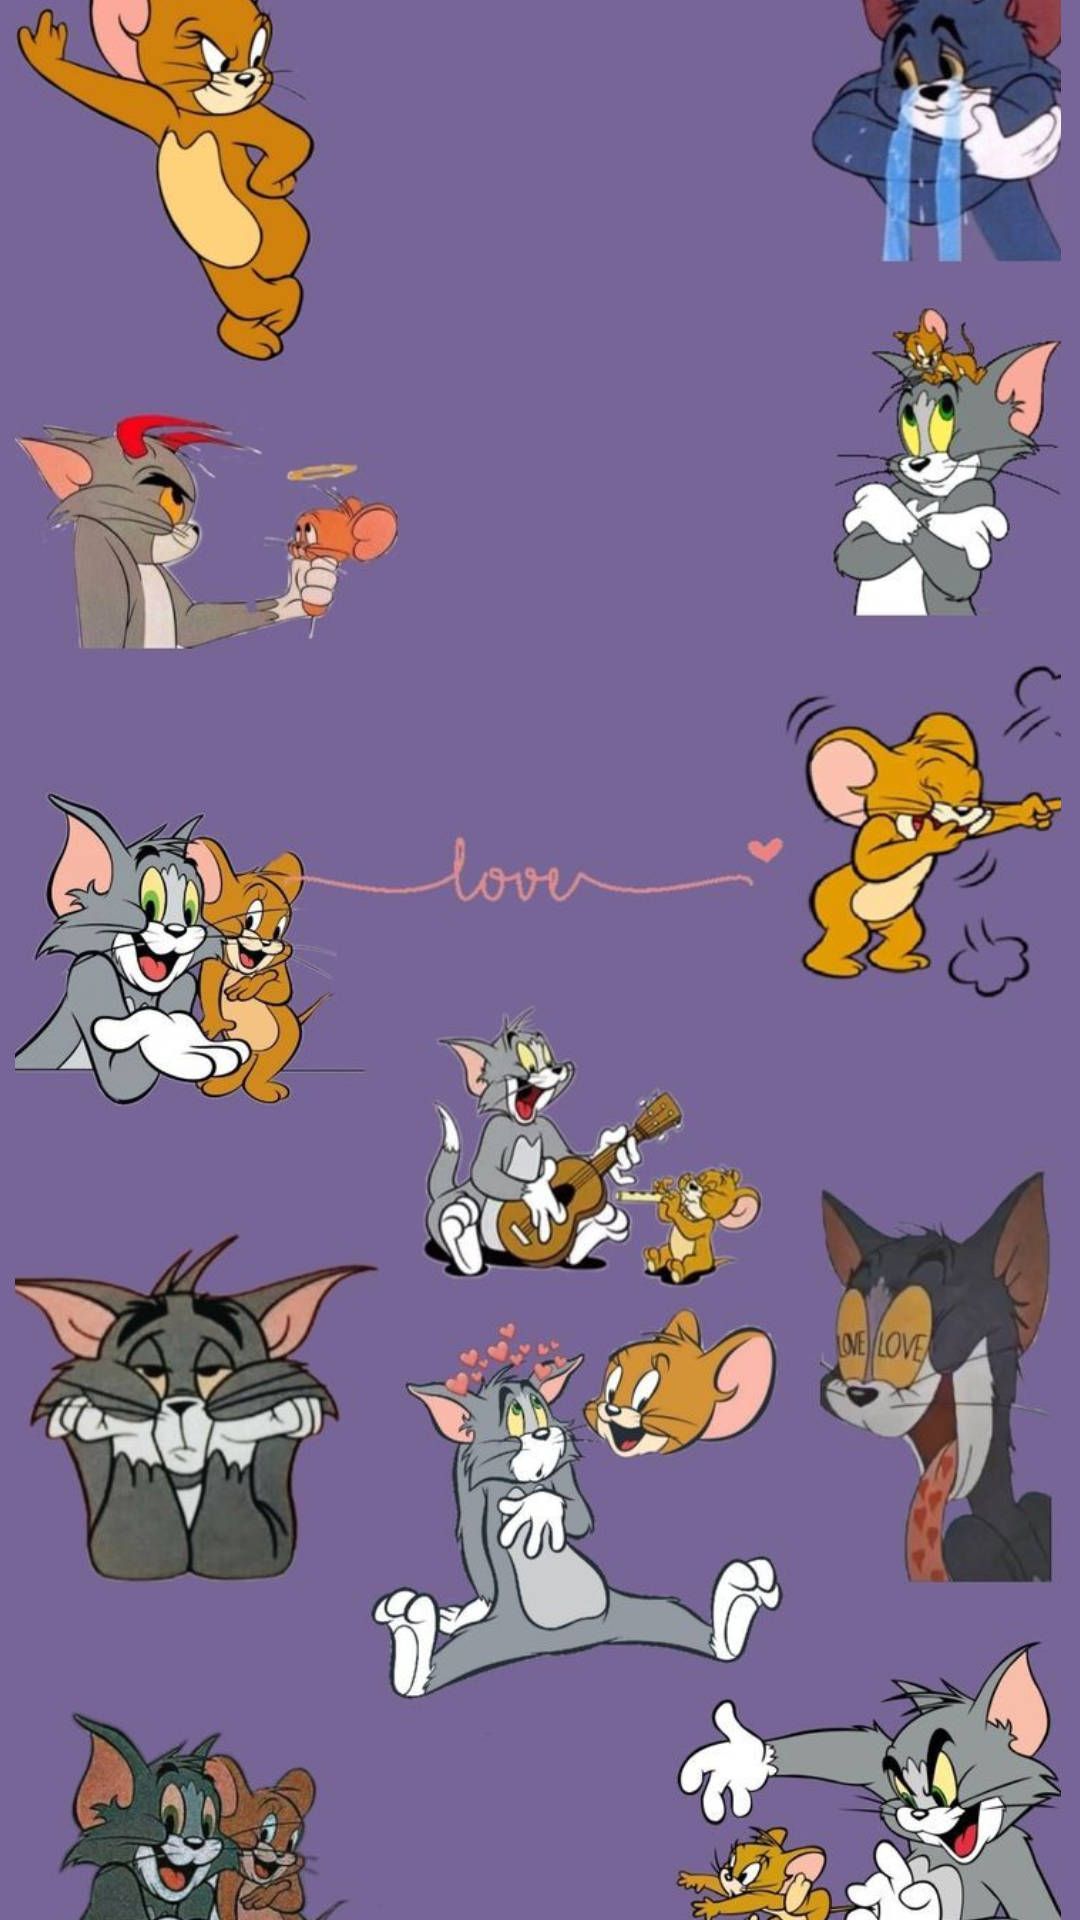 Tom and Jerry wallpaper for phone - Tom and Jerry